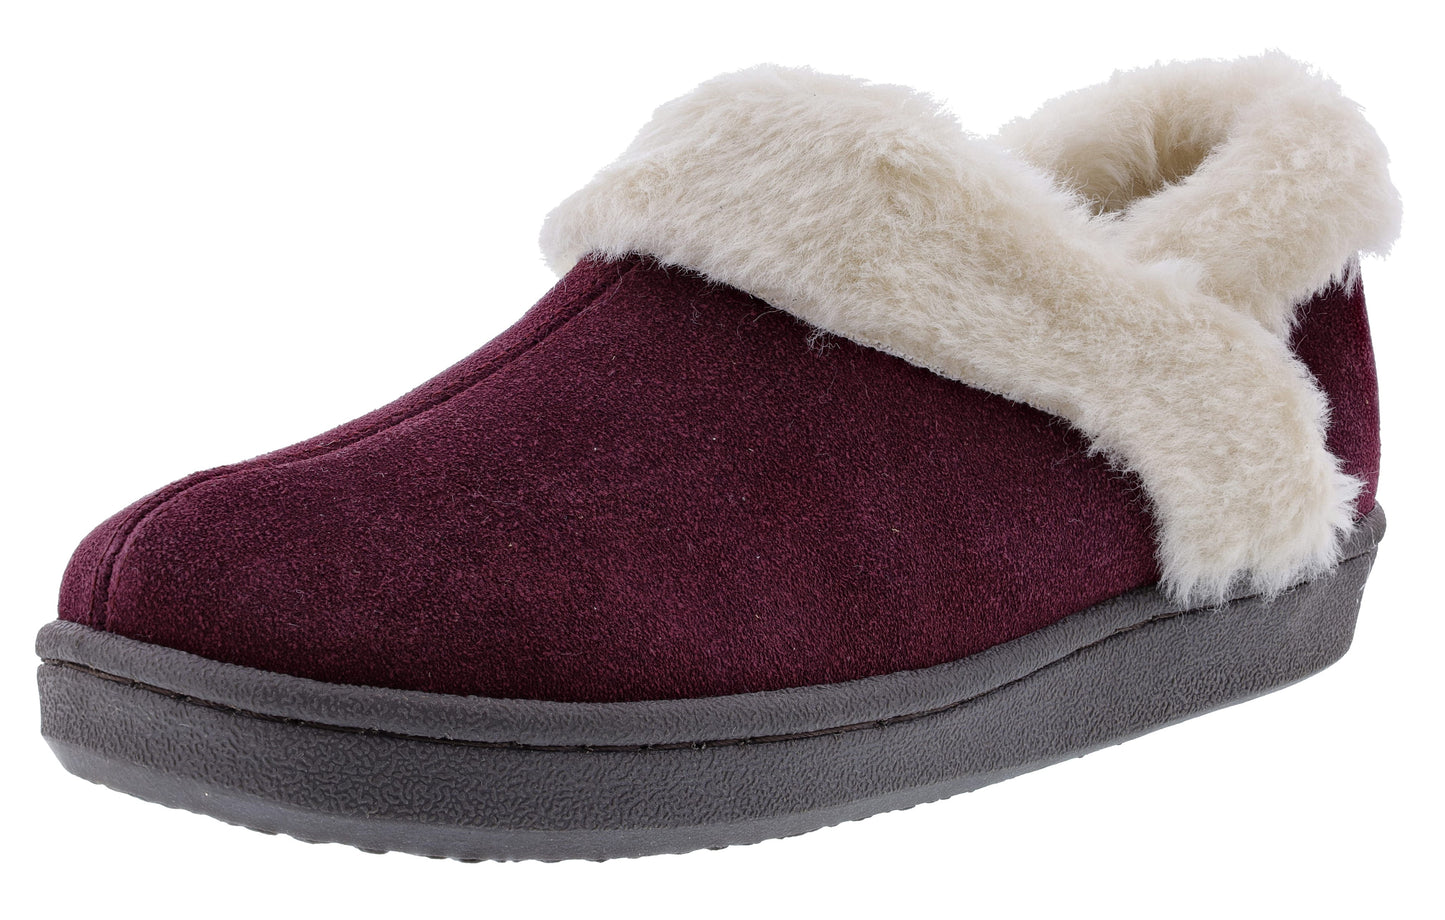 Amazon.co.jp: Room Shoes, Sheep, Couple, Fluffy Slippers, Plush Slippers,  Washable, Anti-Slip, Fluffy, Fluffy, Family, Thick, Loose, Christmas Gift,  For All Seasons, Indoor, Office, Cute, Animal : Clothing, Shoes & Jewelry